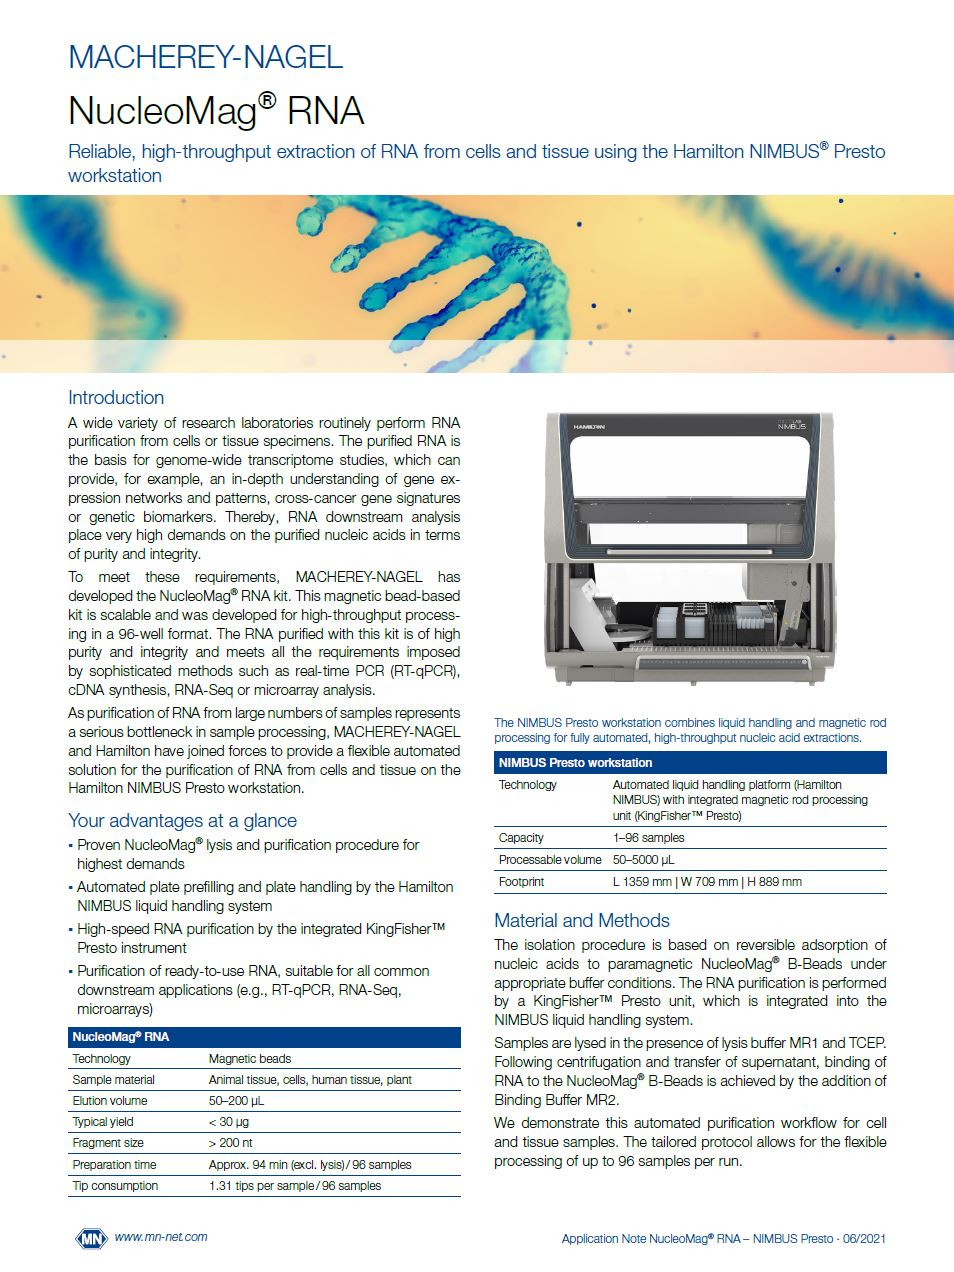 Reliable, high-throughput extraction of RNA from cells and tissue using the  Hamilton NIMBUS® Presto workstation | MACHEREY-NAGEL